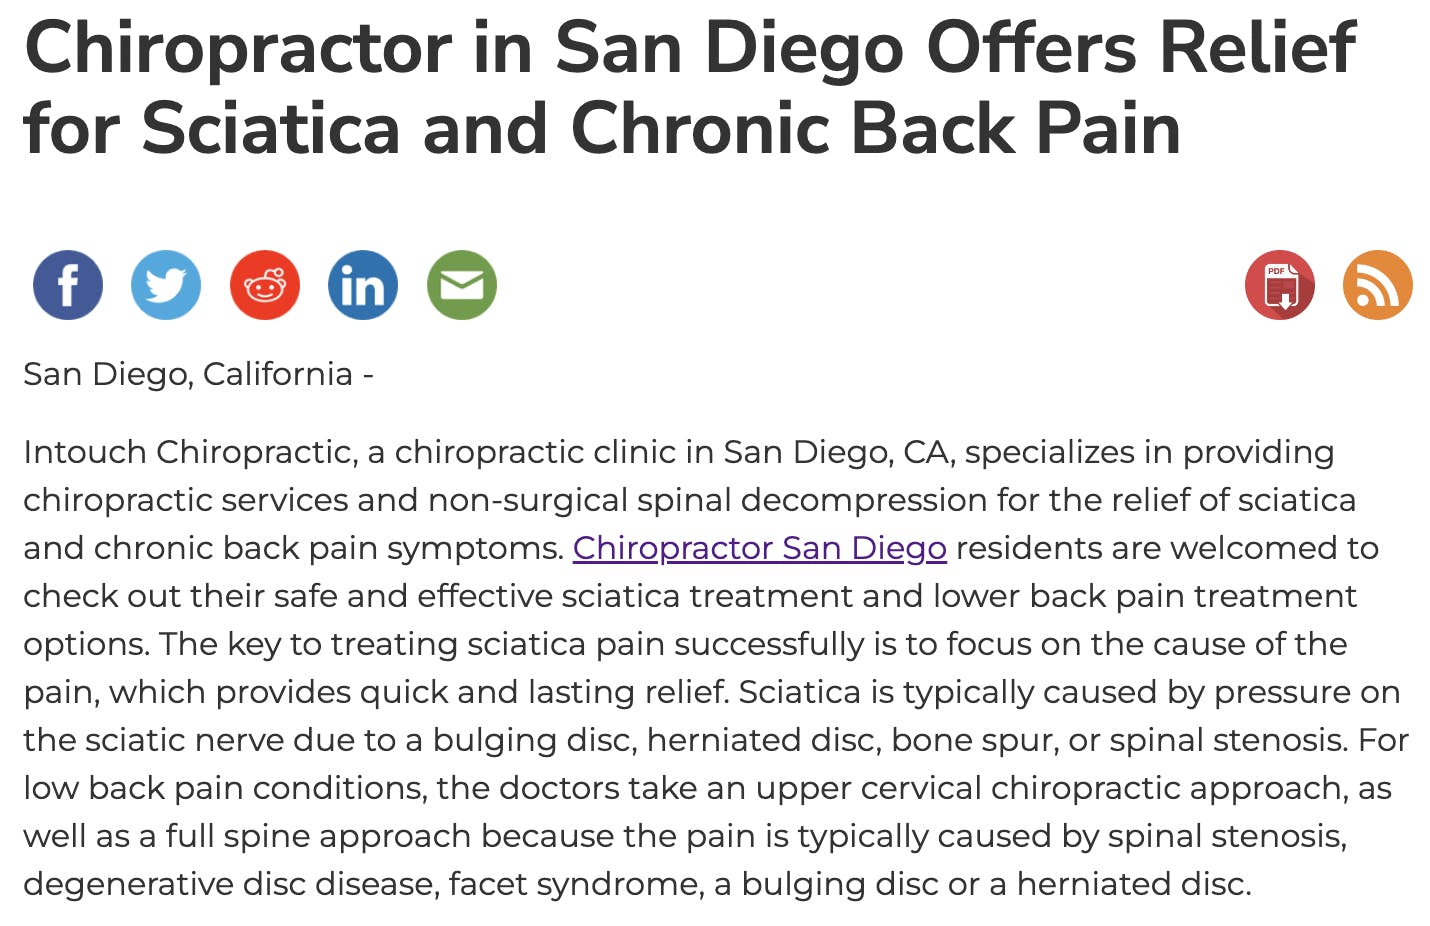 Chronic Back Pain and Sciatica Relief